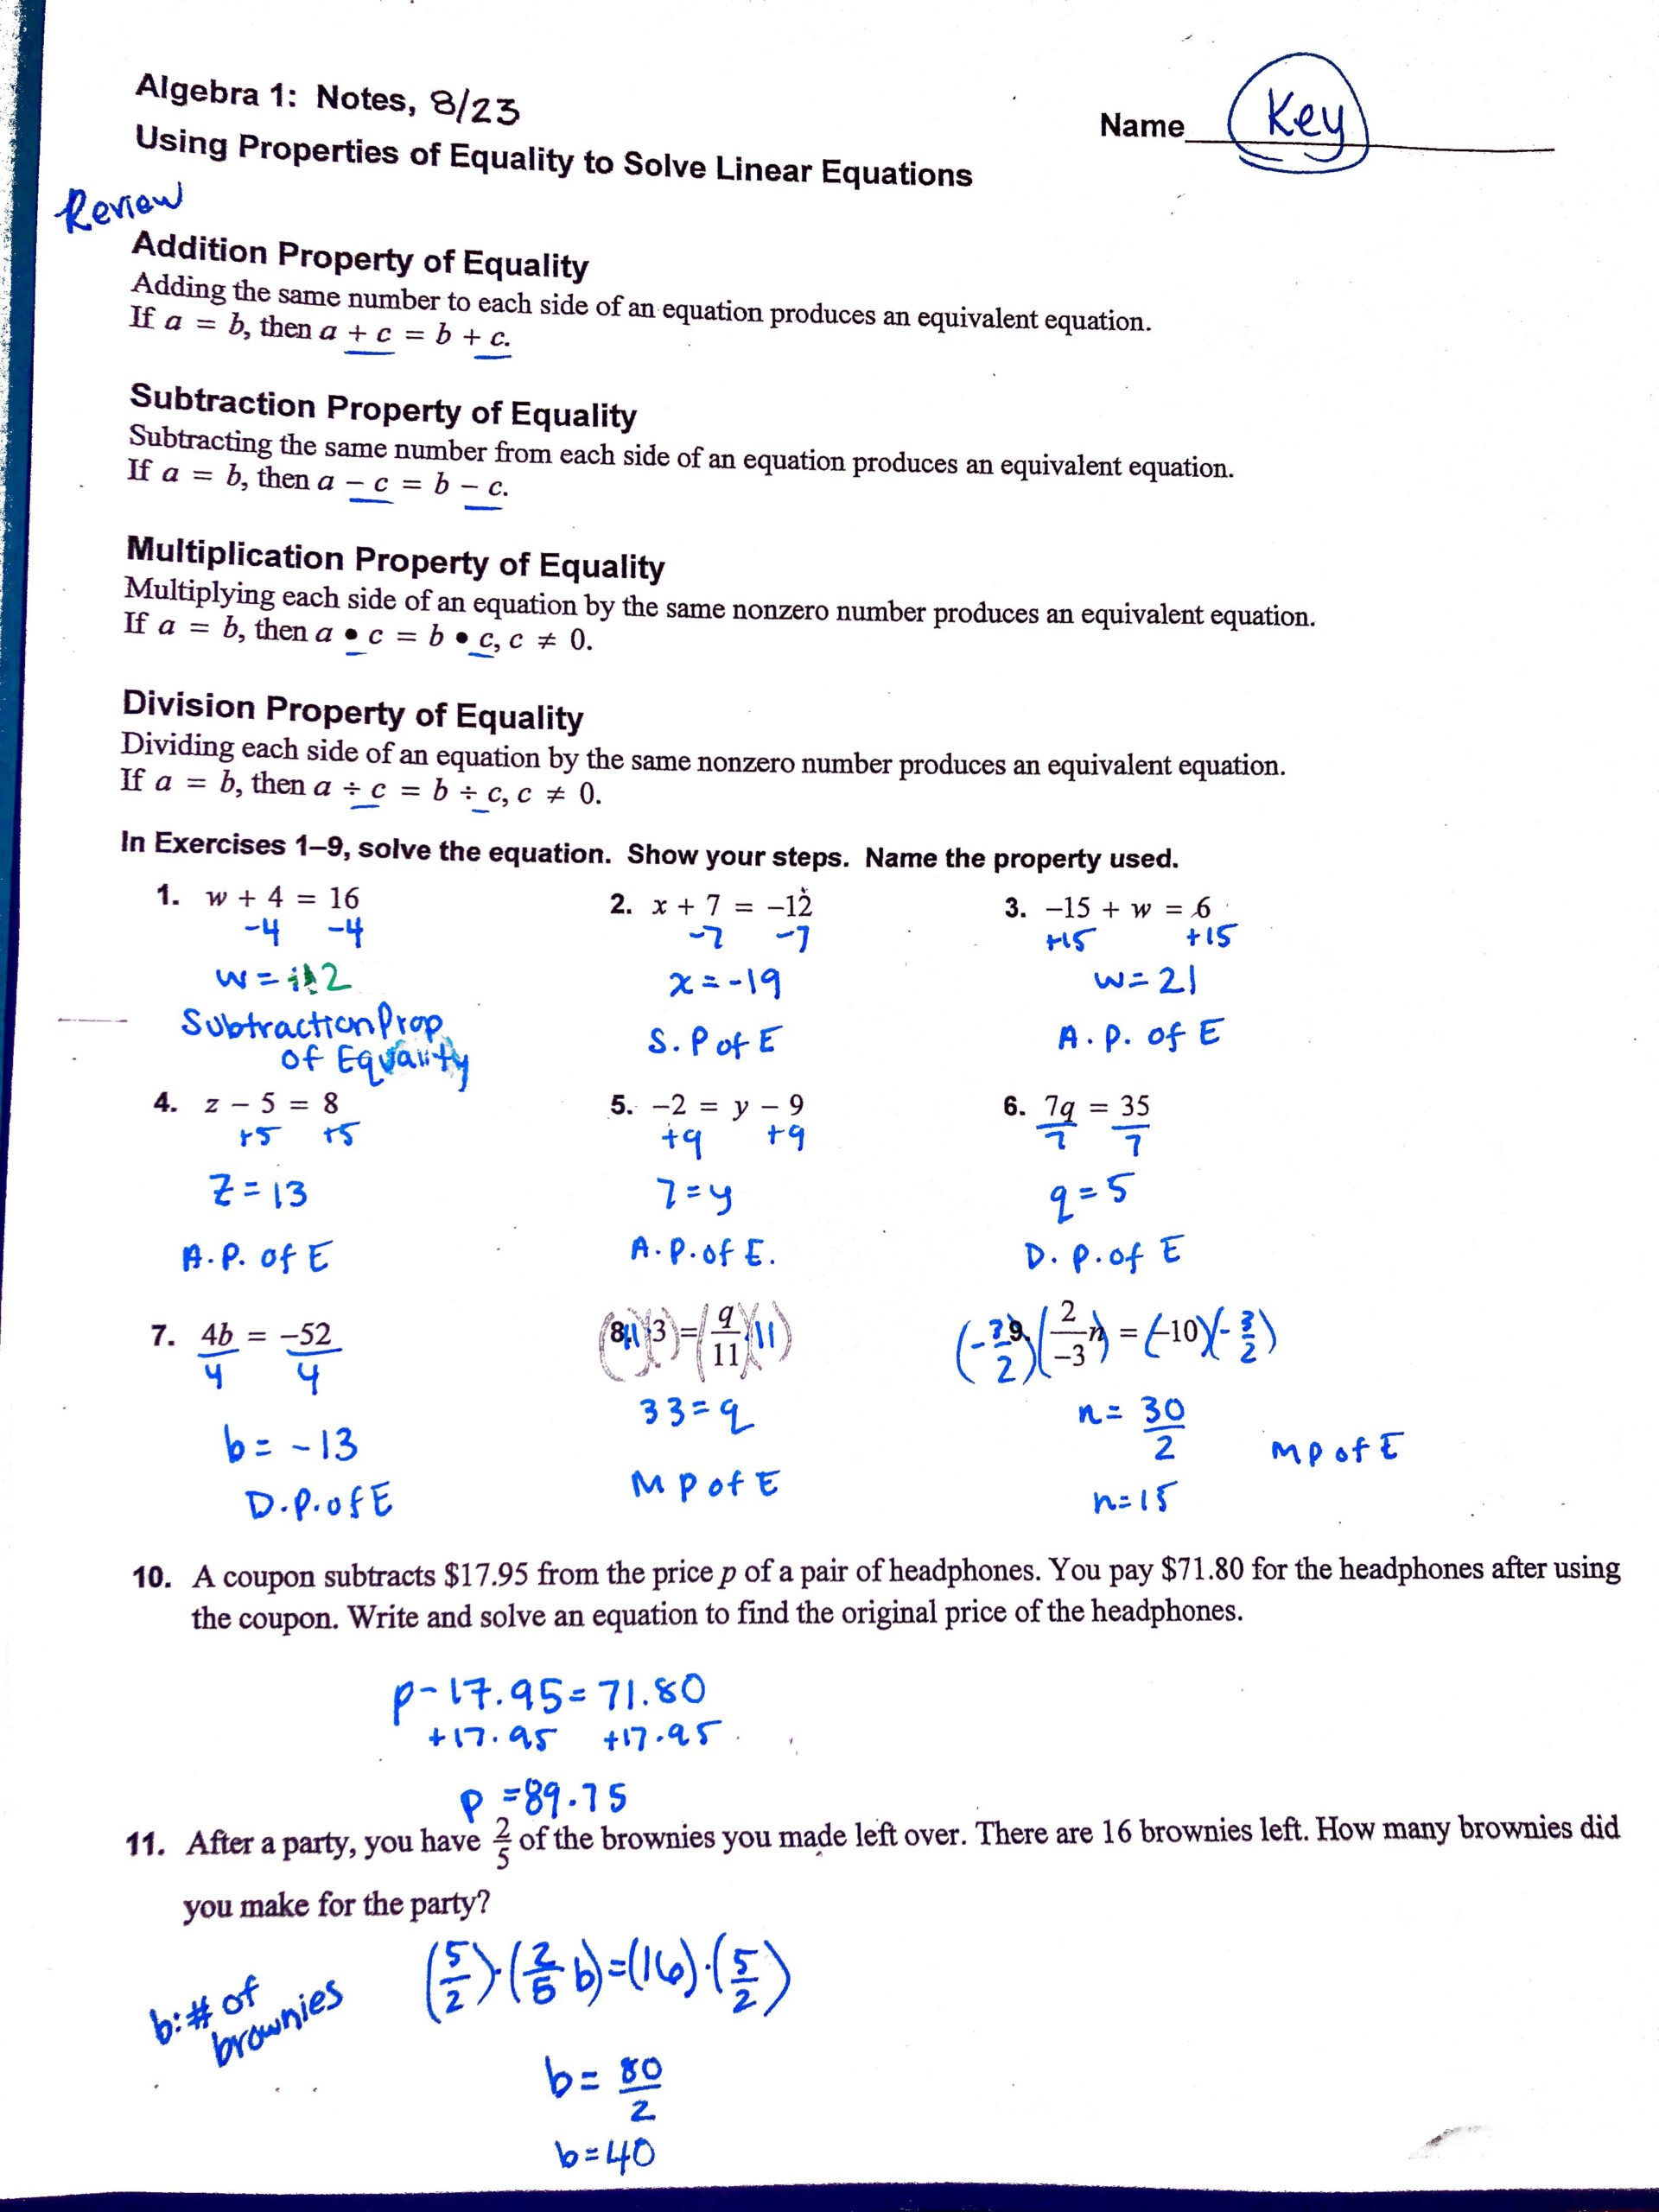 Writing Linear Equations From Word Problems Worksheet Pdf Db excel